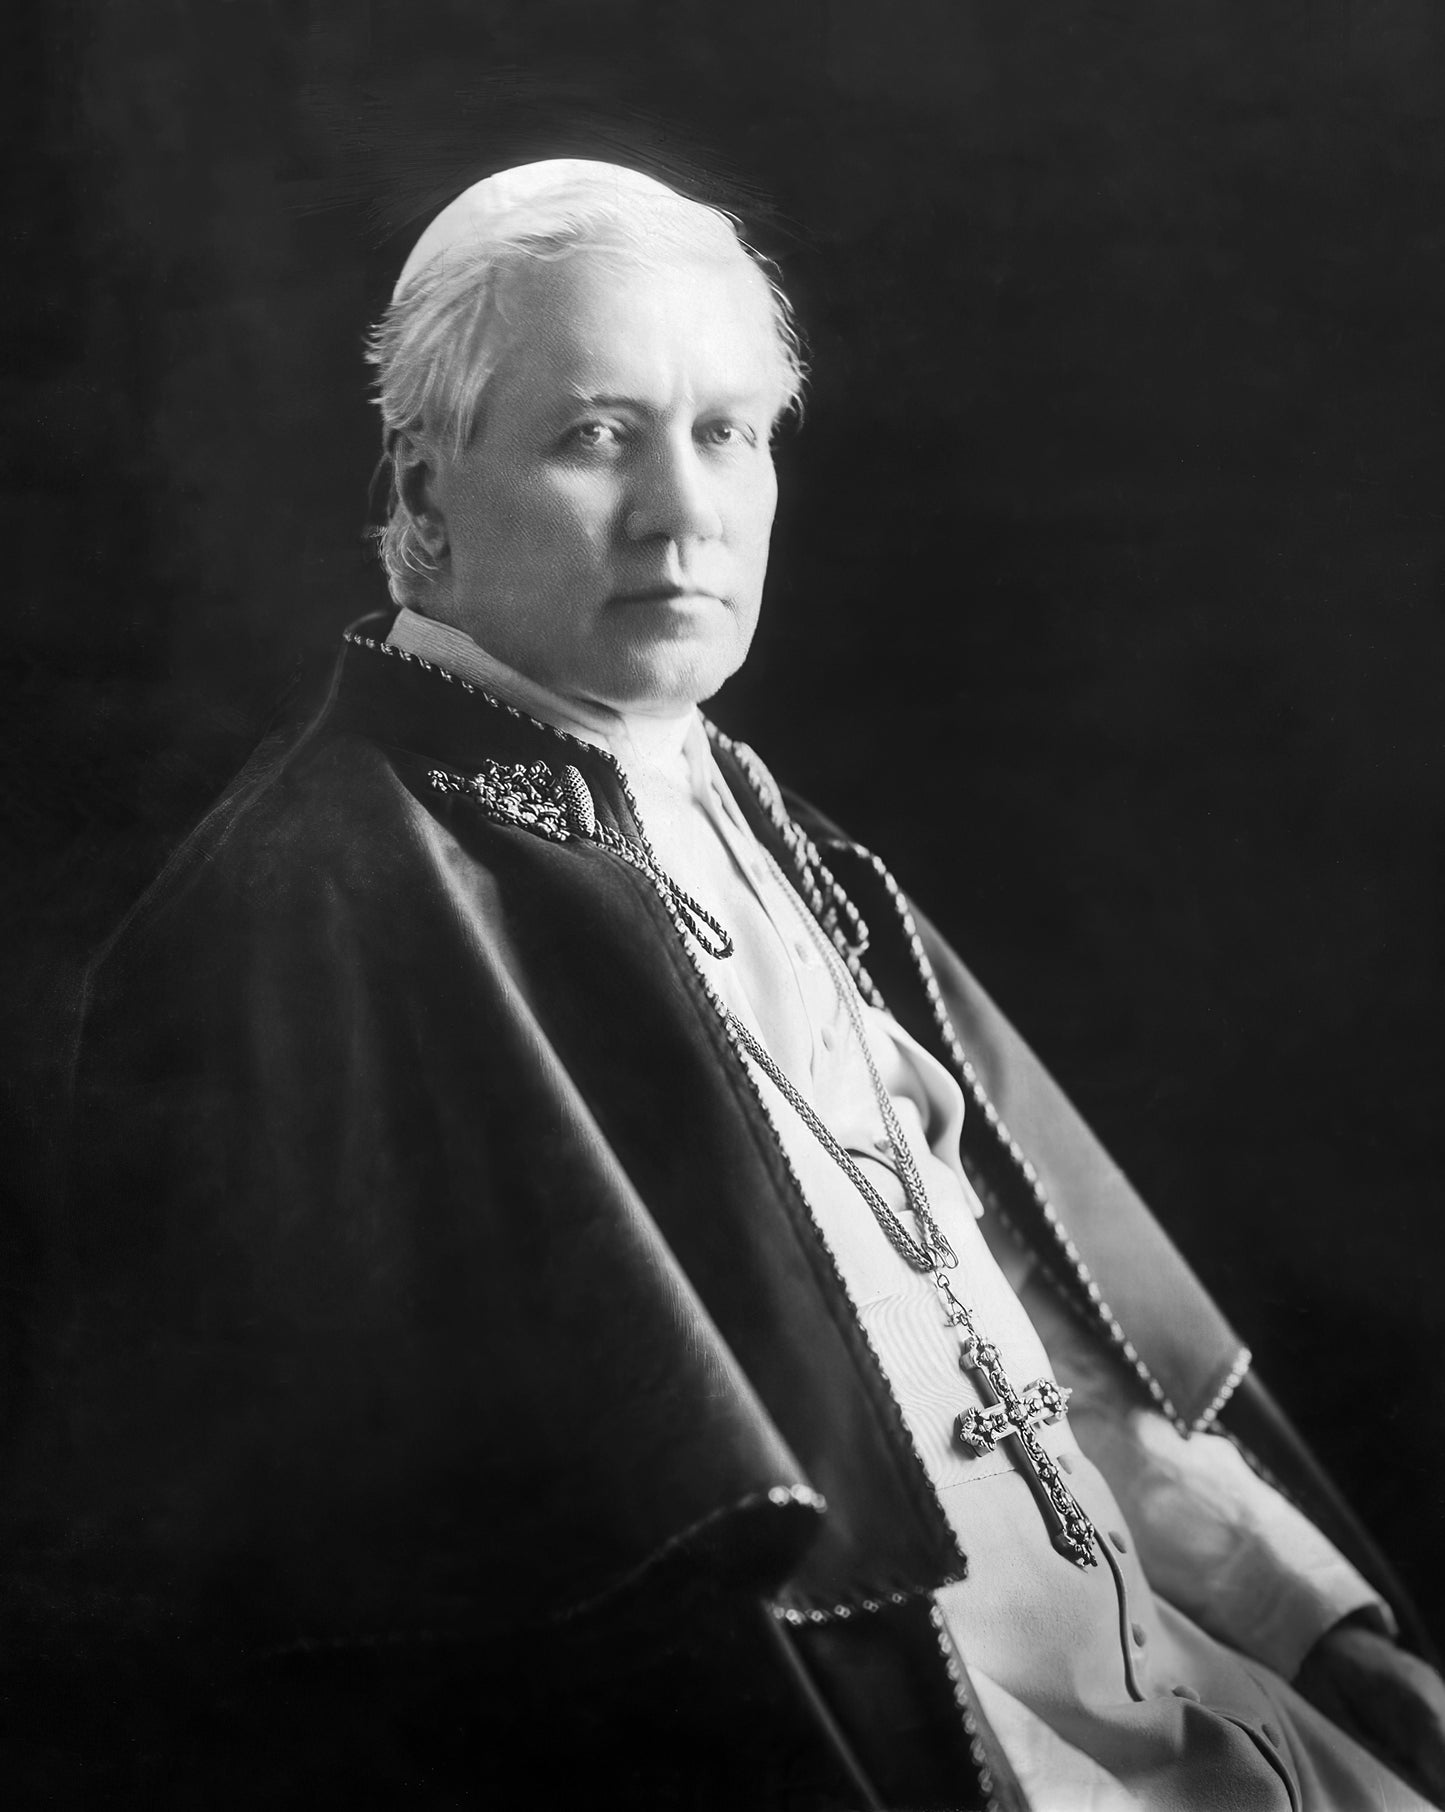 POPE PIUS X GLOSSY POSTER PICTURE PHOTO PRINT BANNER riese pio catholic